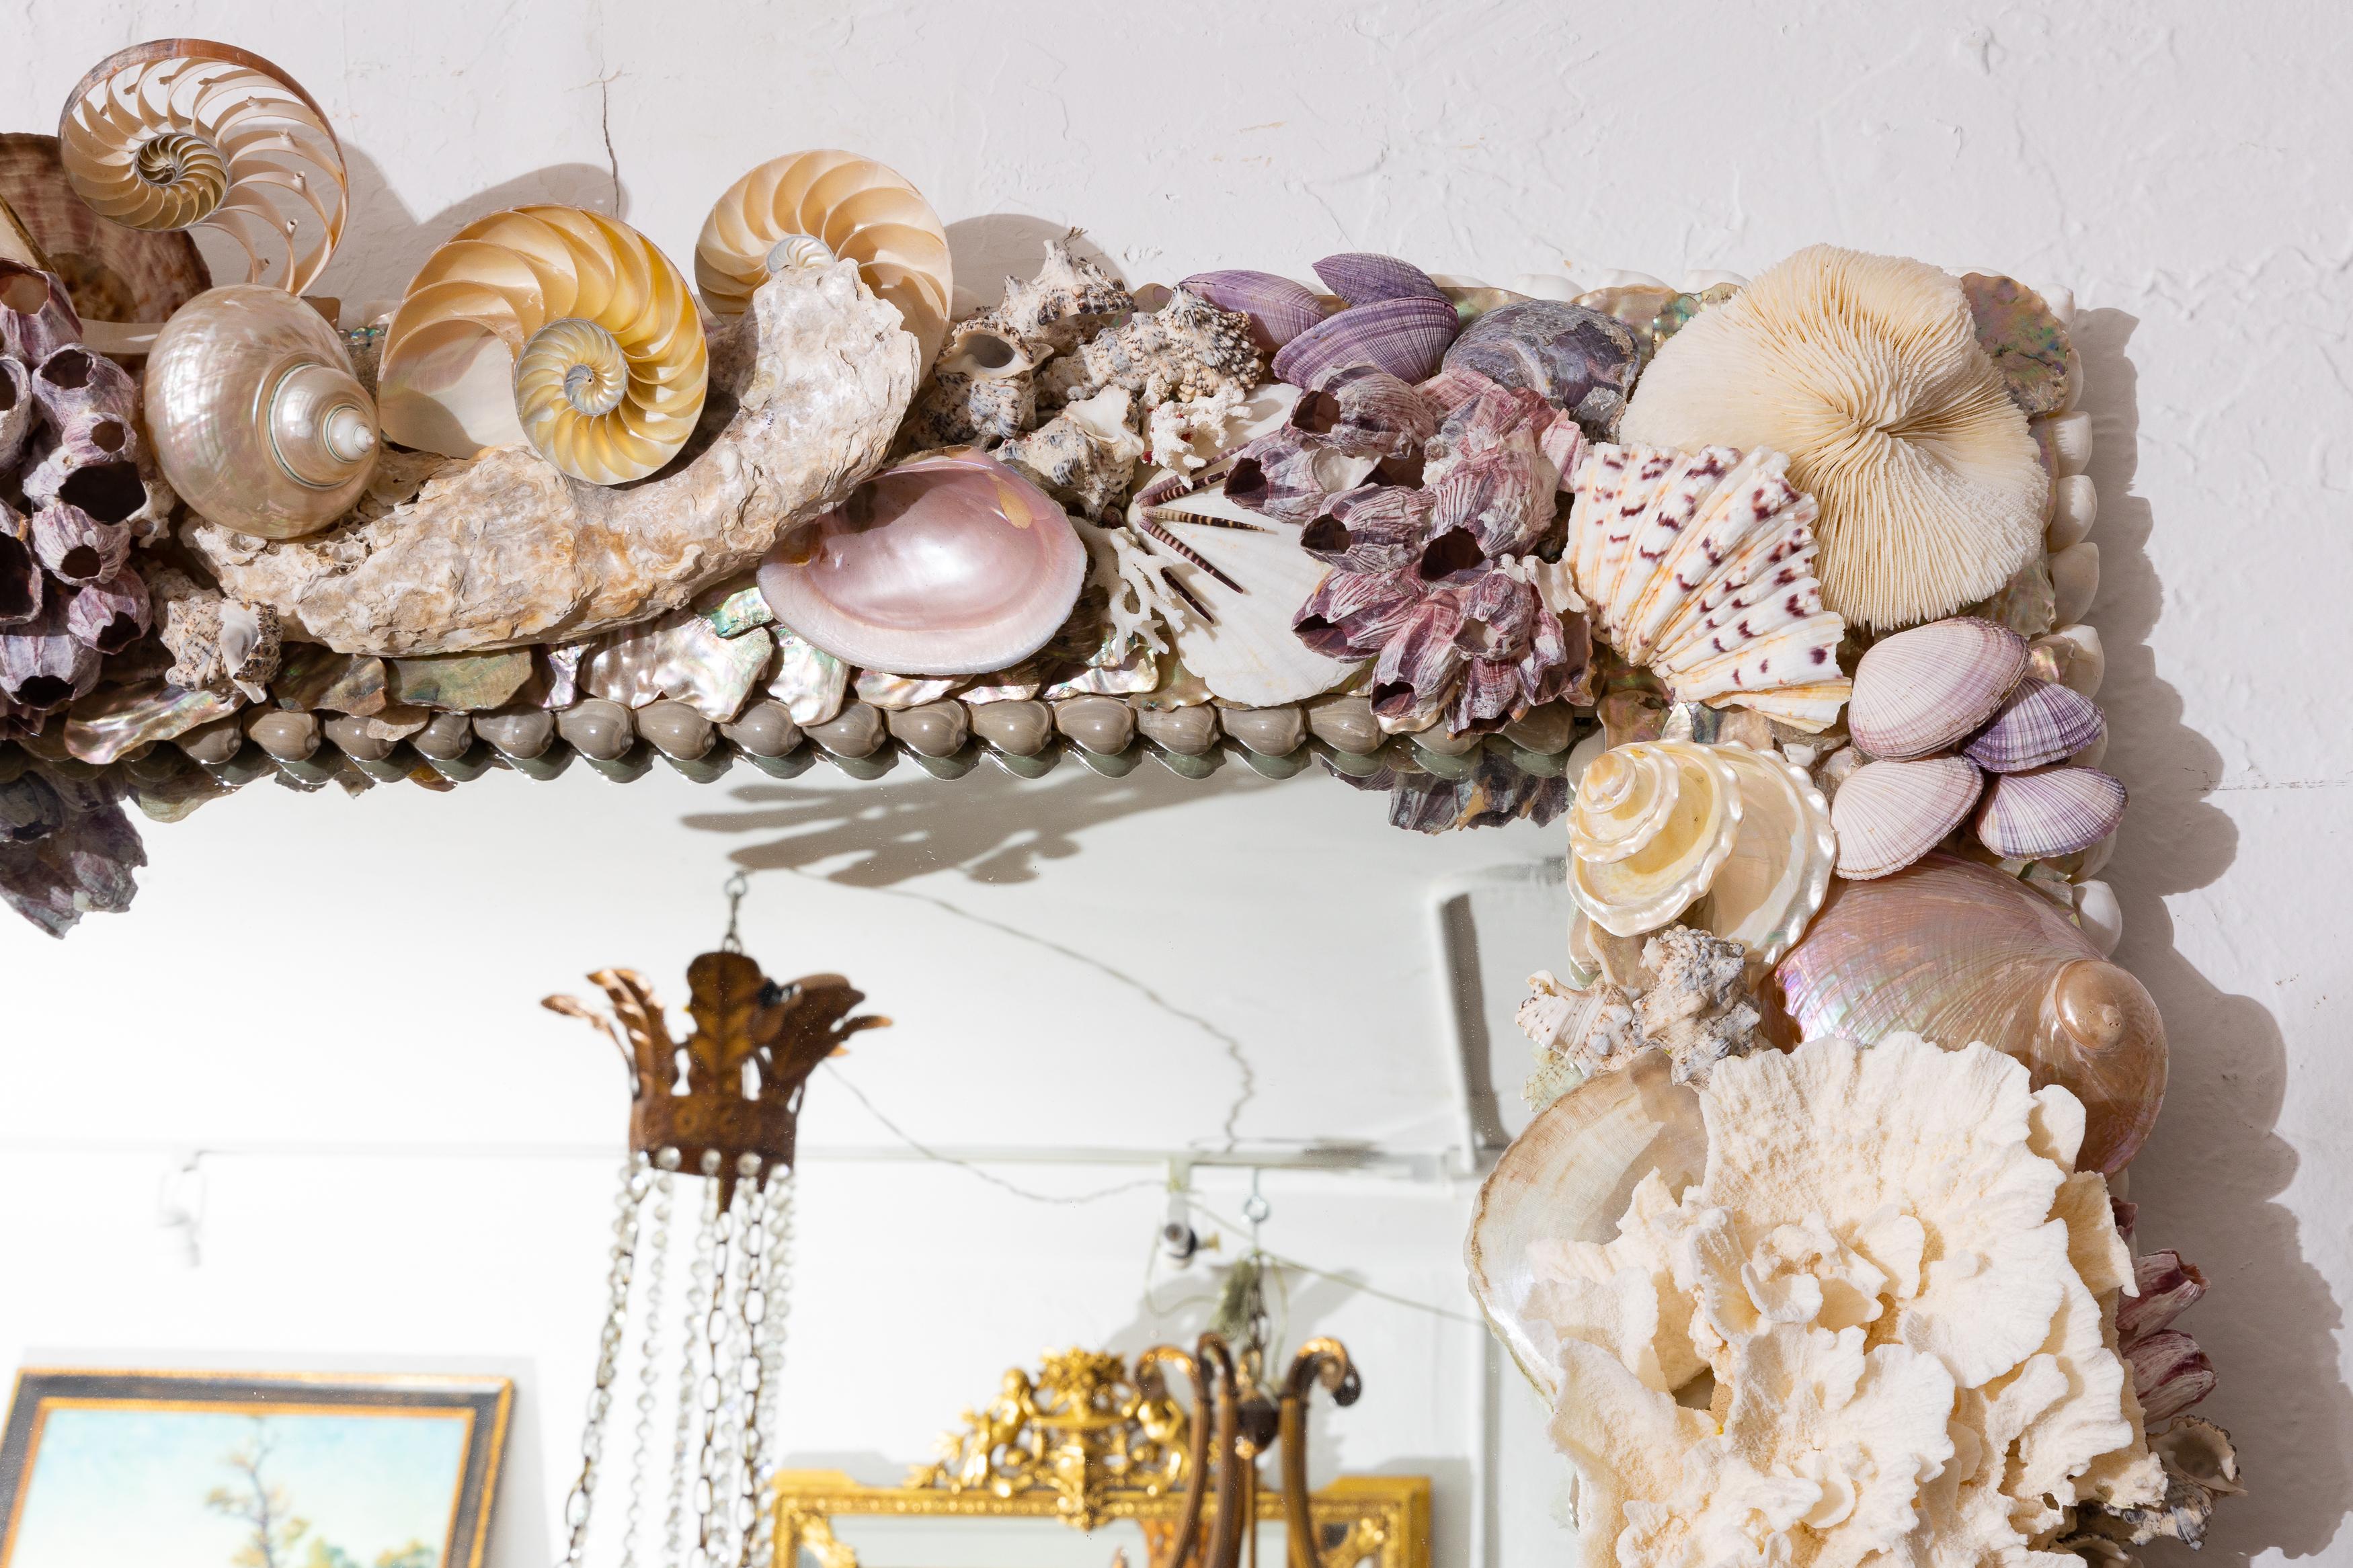 This is an exceptional and dramatic custom mirror, the frame encrusted with a myriad of unique shells and coral.